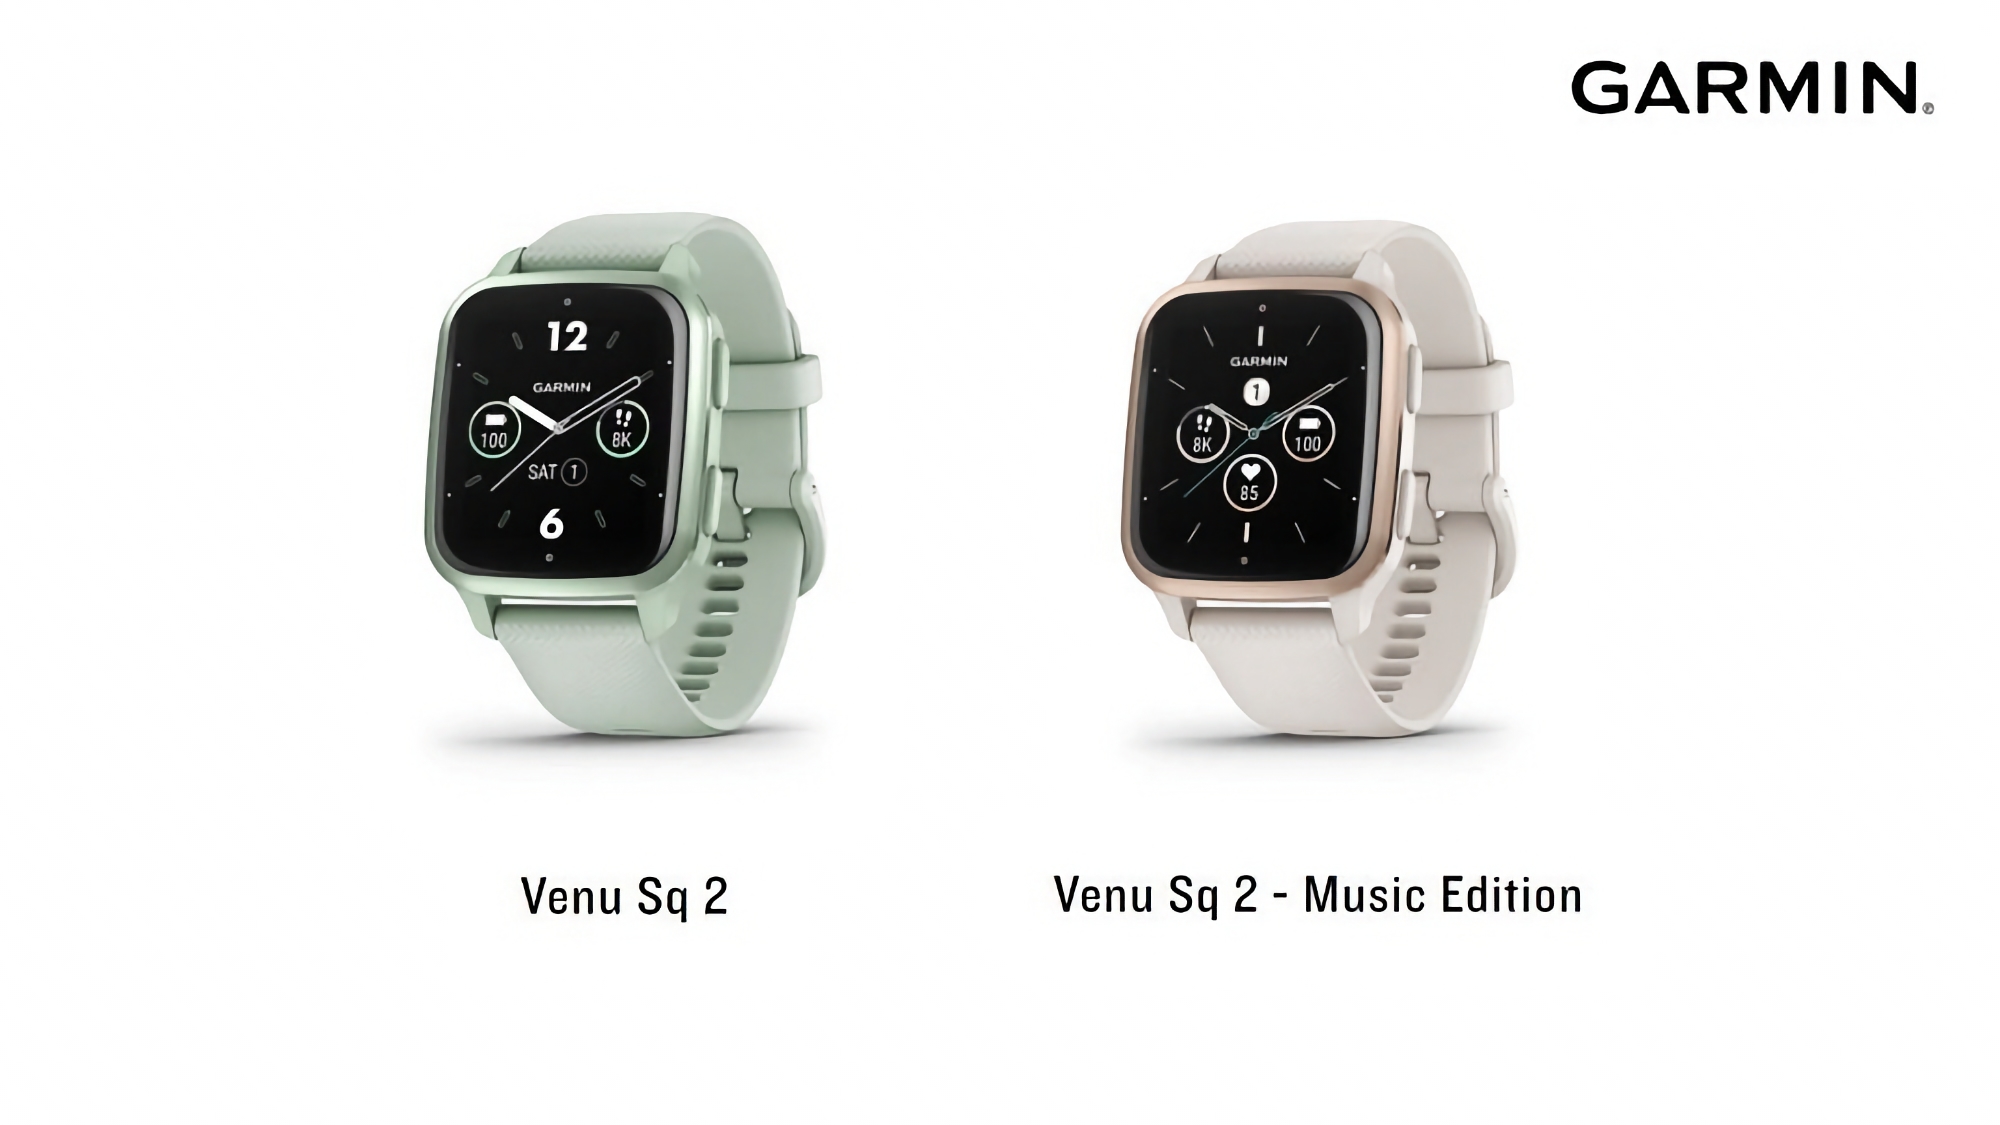 Garmin is testing new firmware for the Venu Sq 2 and Venu Sq 2 Music Edition sports watches